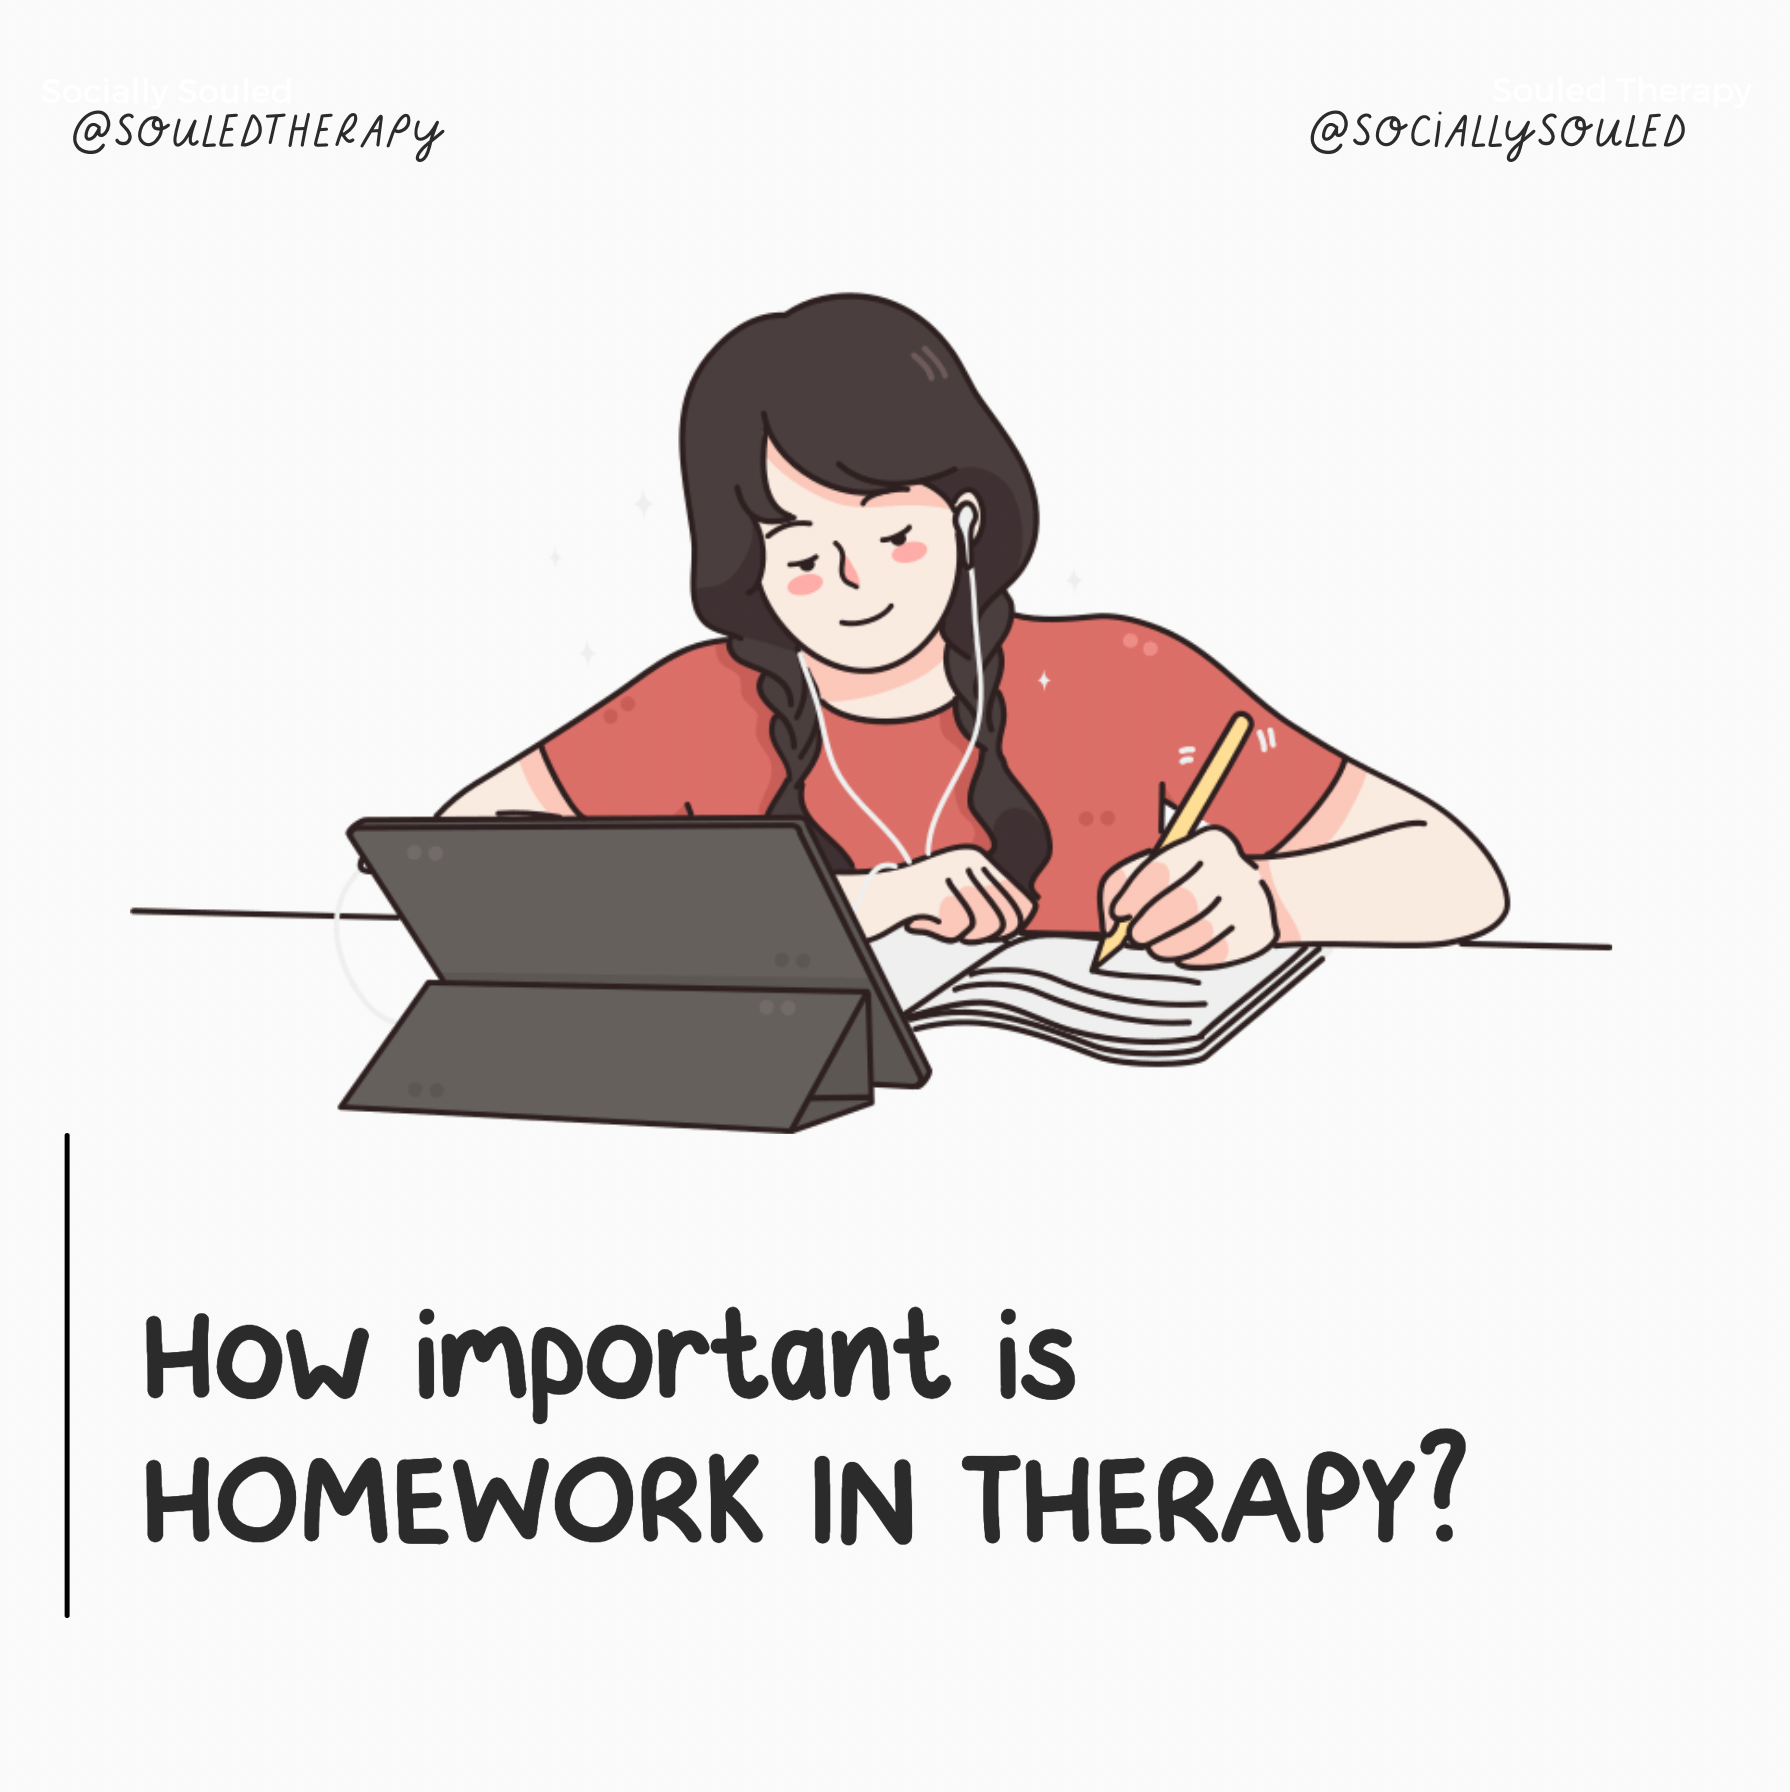 How important is homework in therapy?